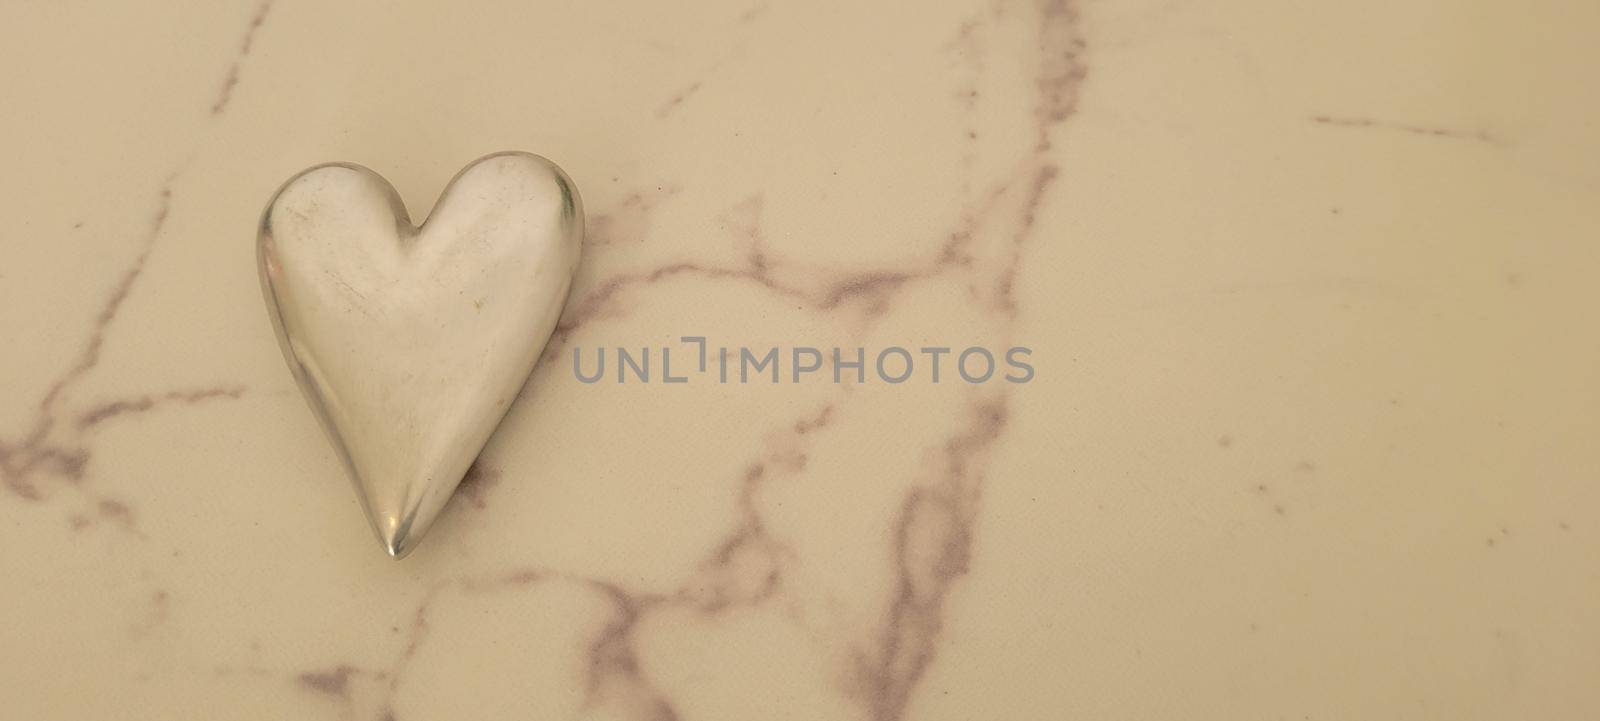 romantic background of iron shiny heart with marble and leaf